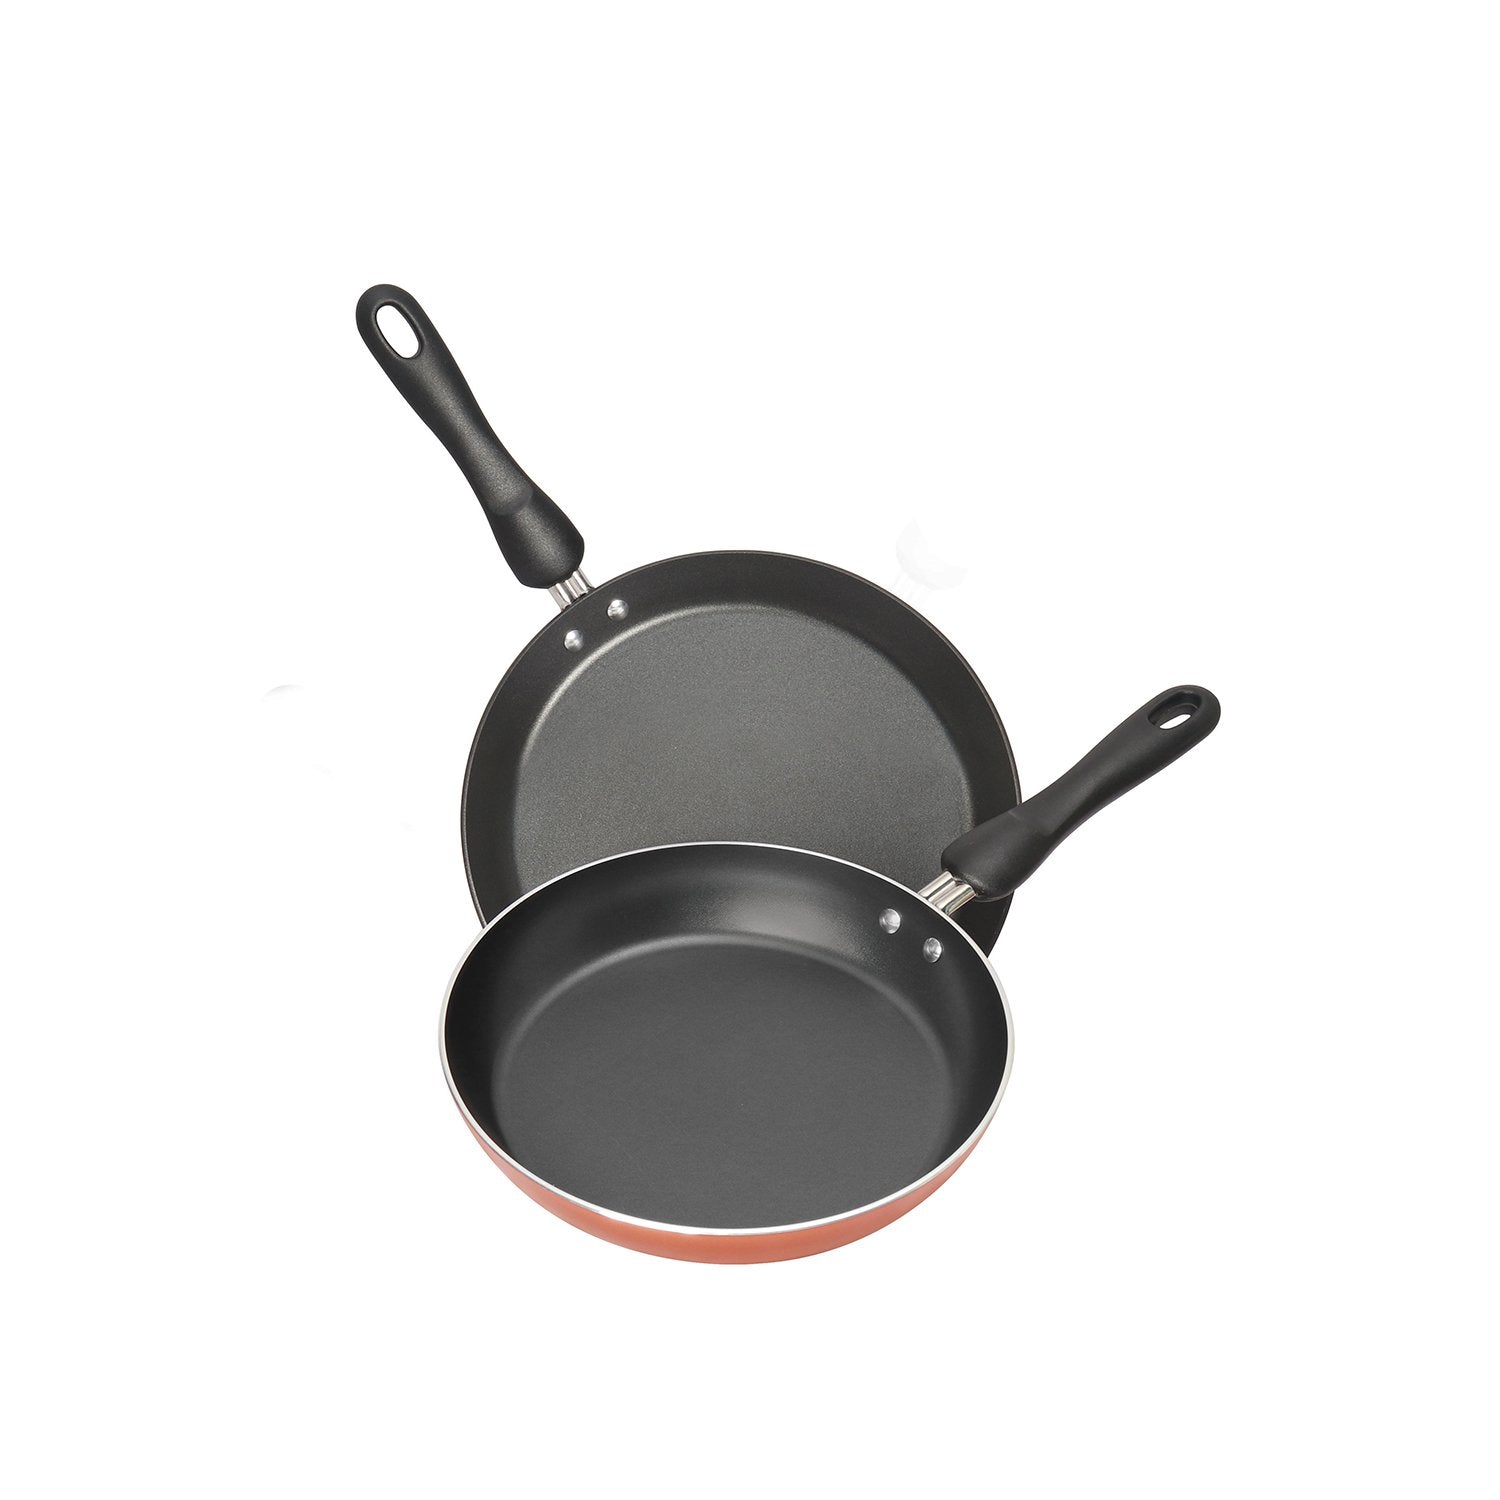 Meyer Non-Stick 2-Piece Cookware Set, Frypan + Flat Tawa (Suitable For Gas & Electric Cooktops) - Pots and Pans